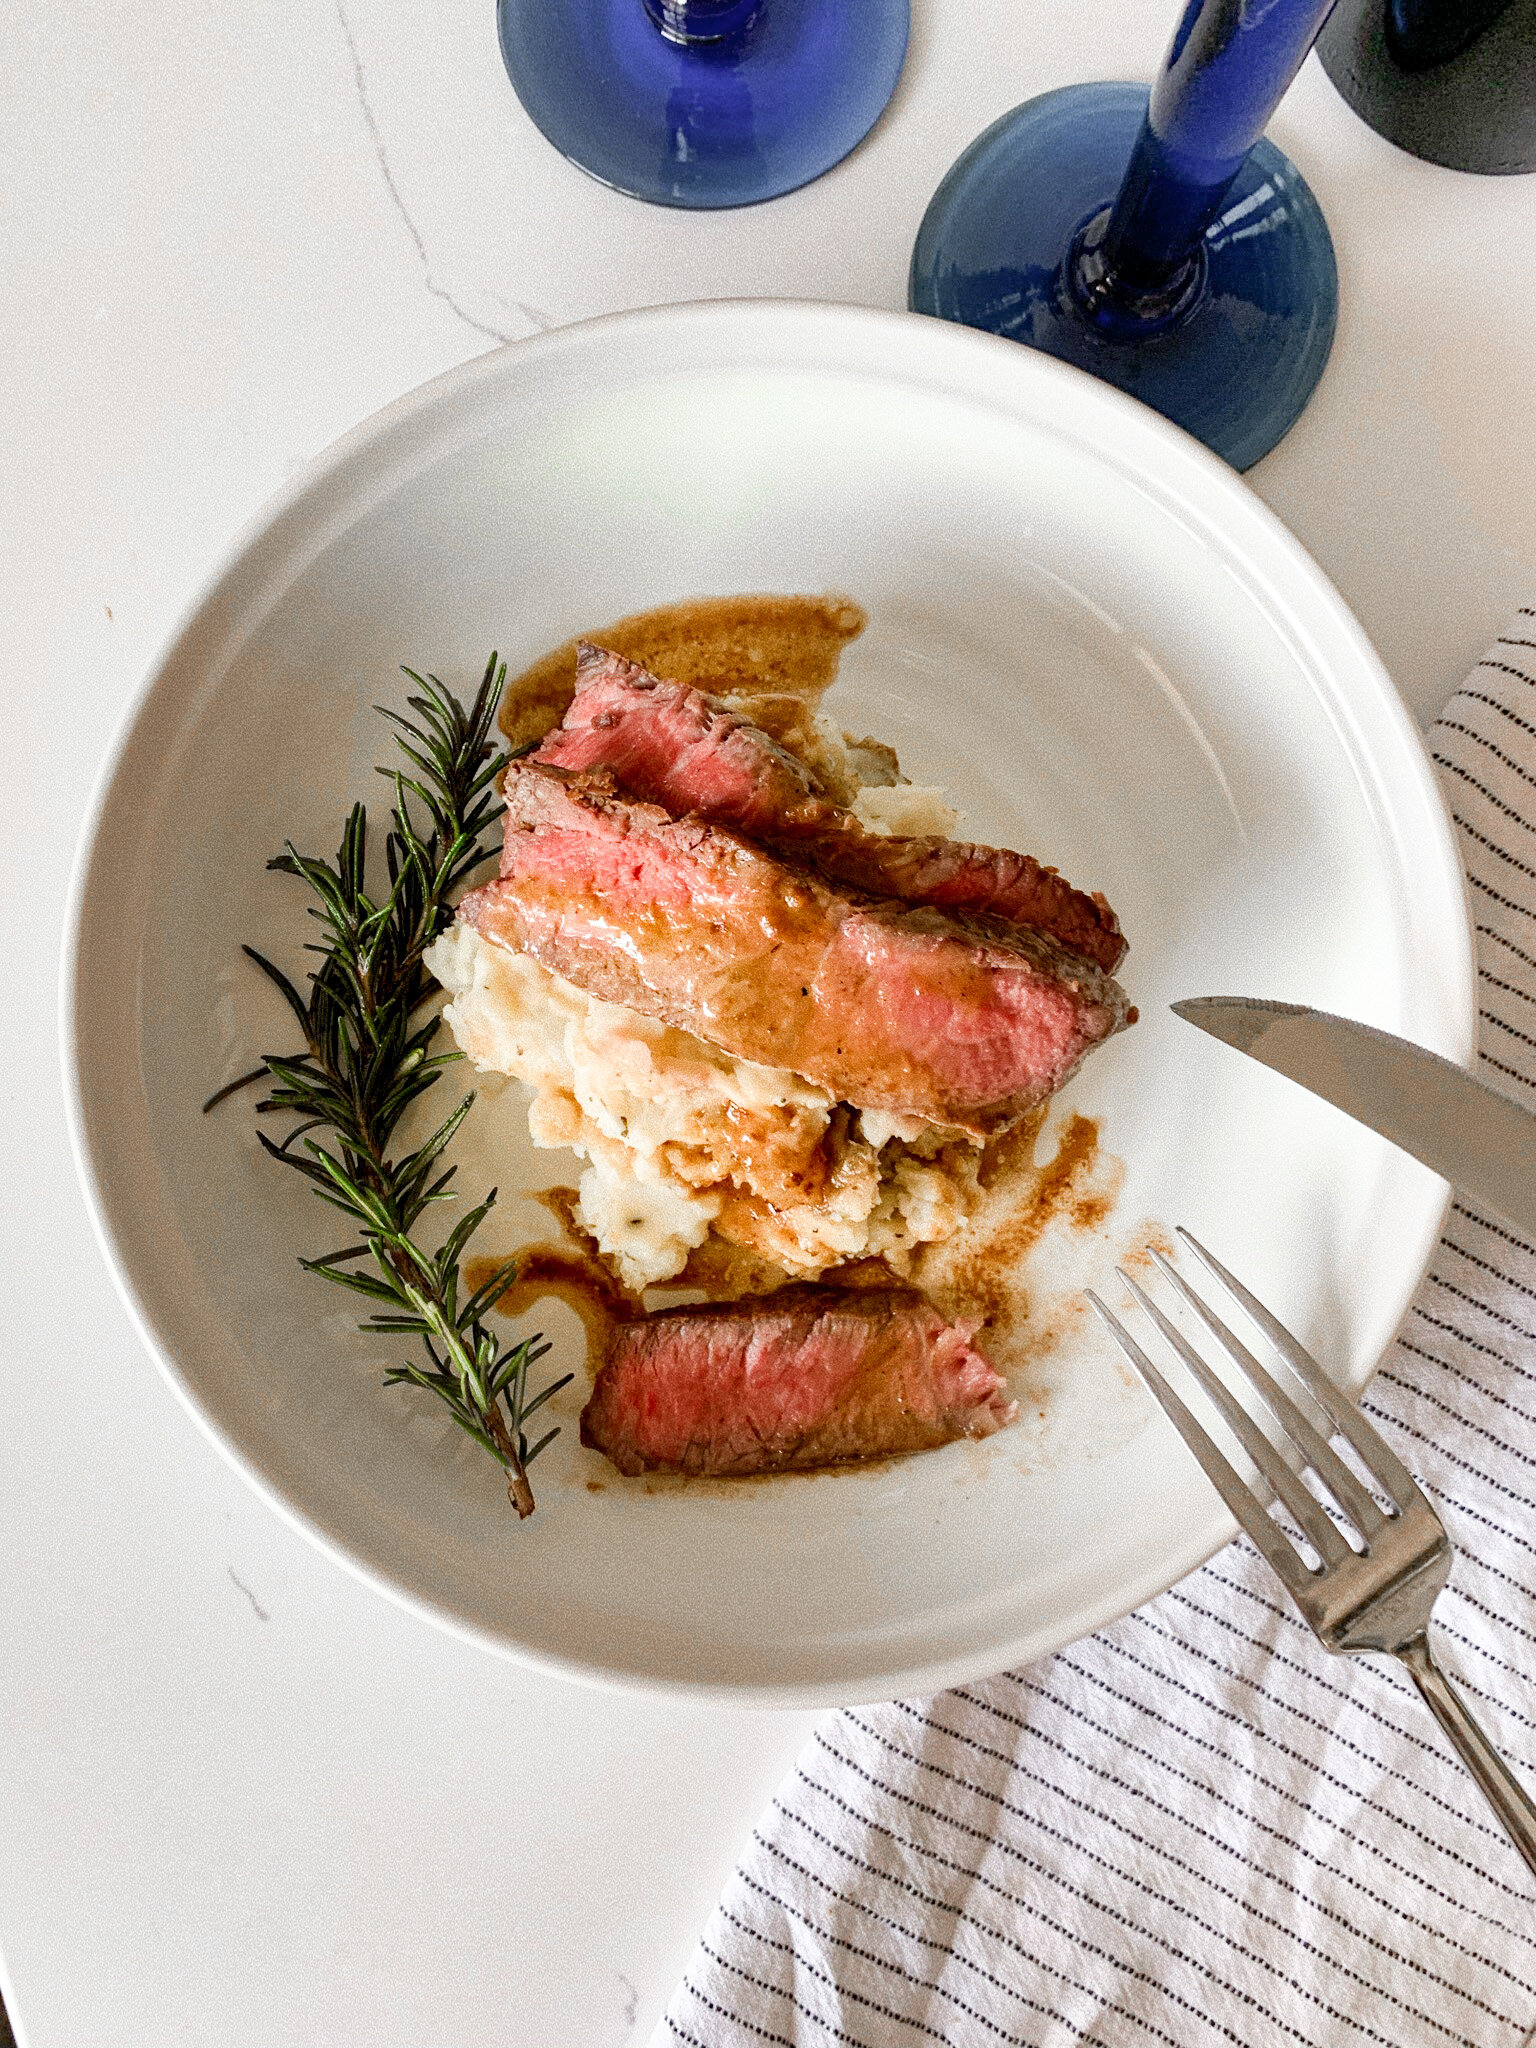 The plated pan-seared steak with rosemary garlic butter pan sauce and mash